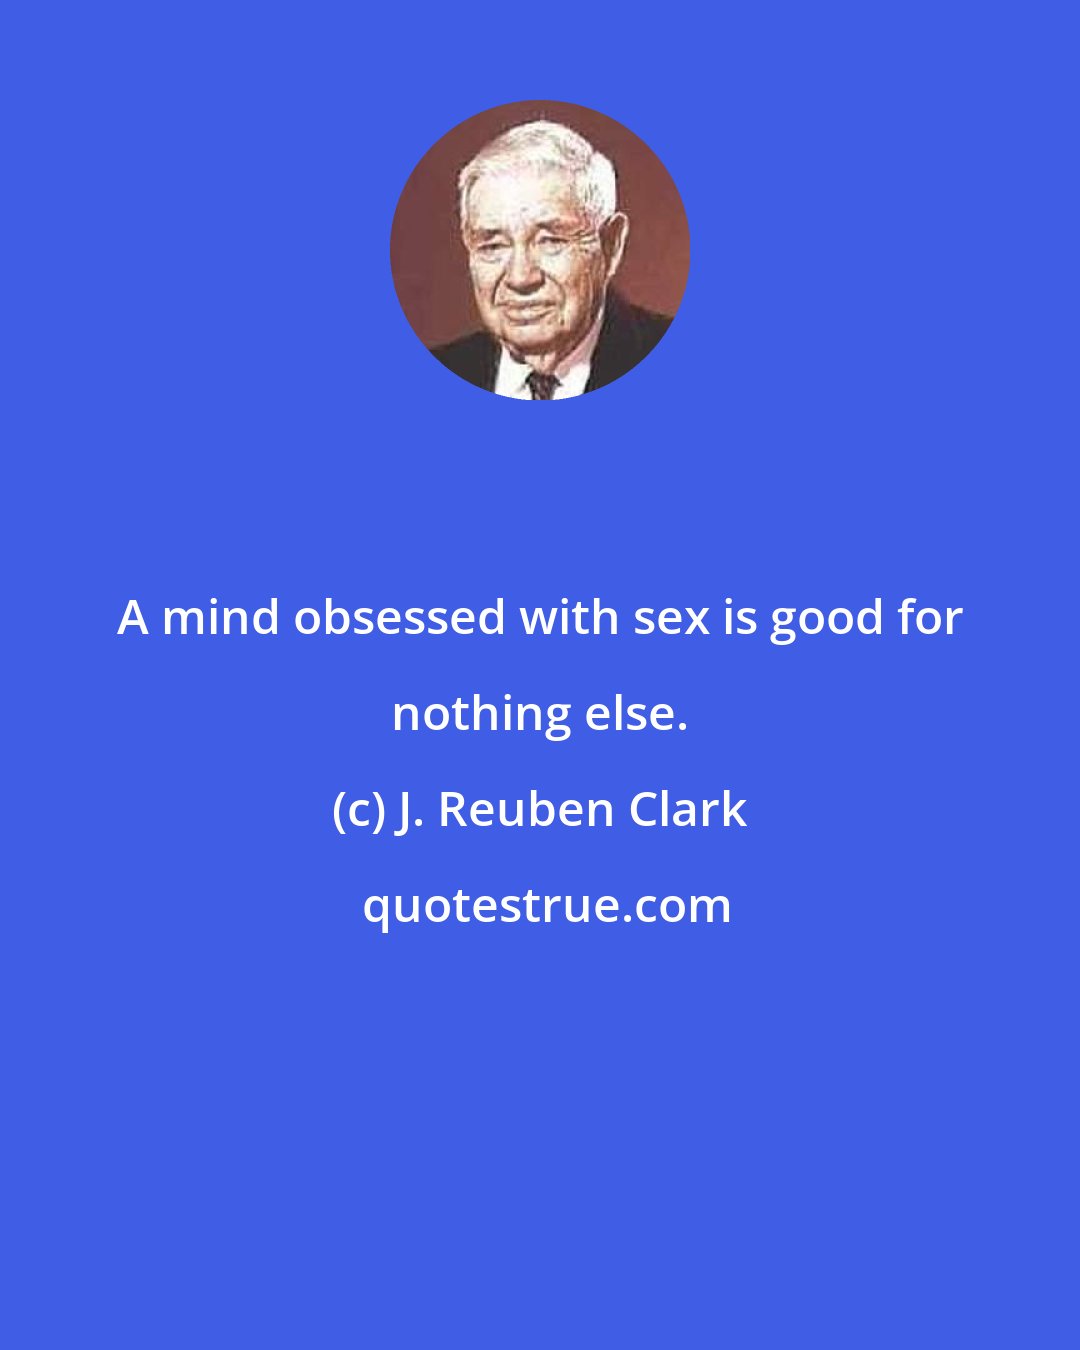 J. Reuben Clark: A mind obsessed with sex is good for nothing else.